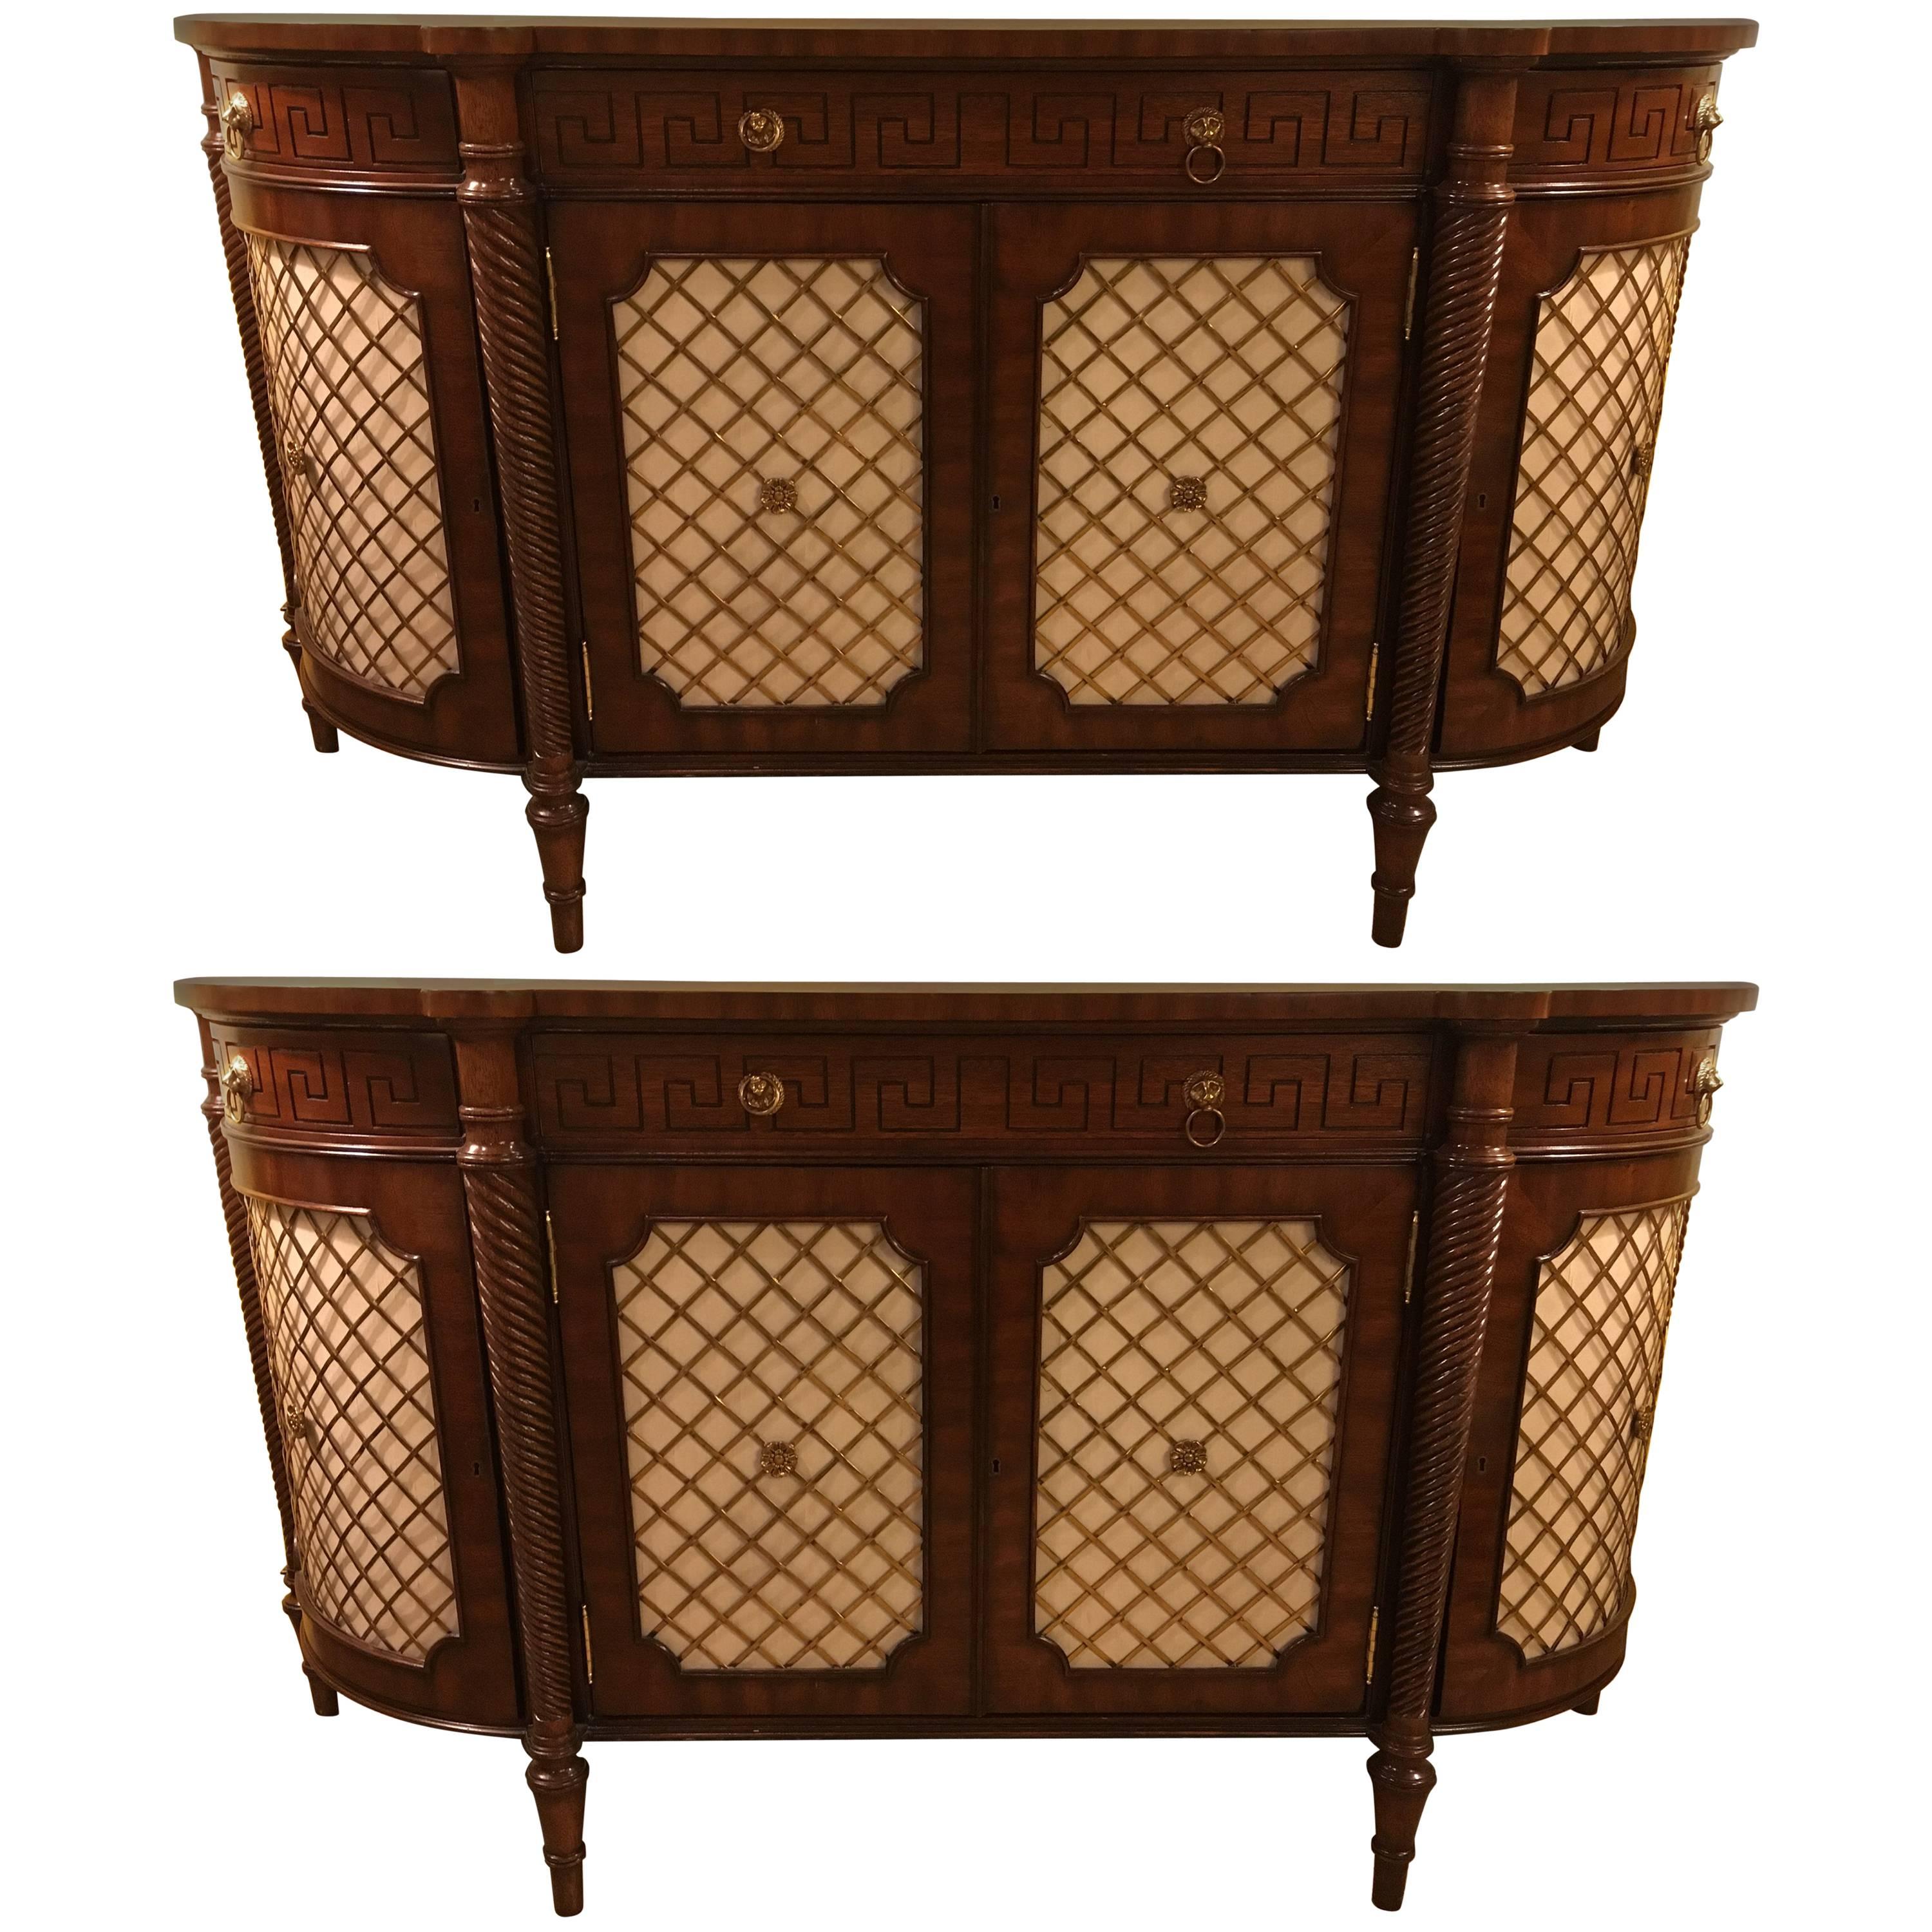 Pair of Demilune Maitland Smith Georgian Style Serving Cabinets or Commodes